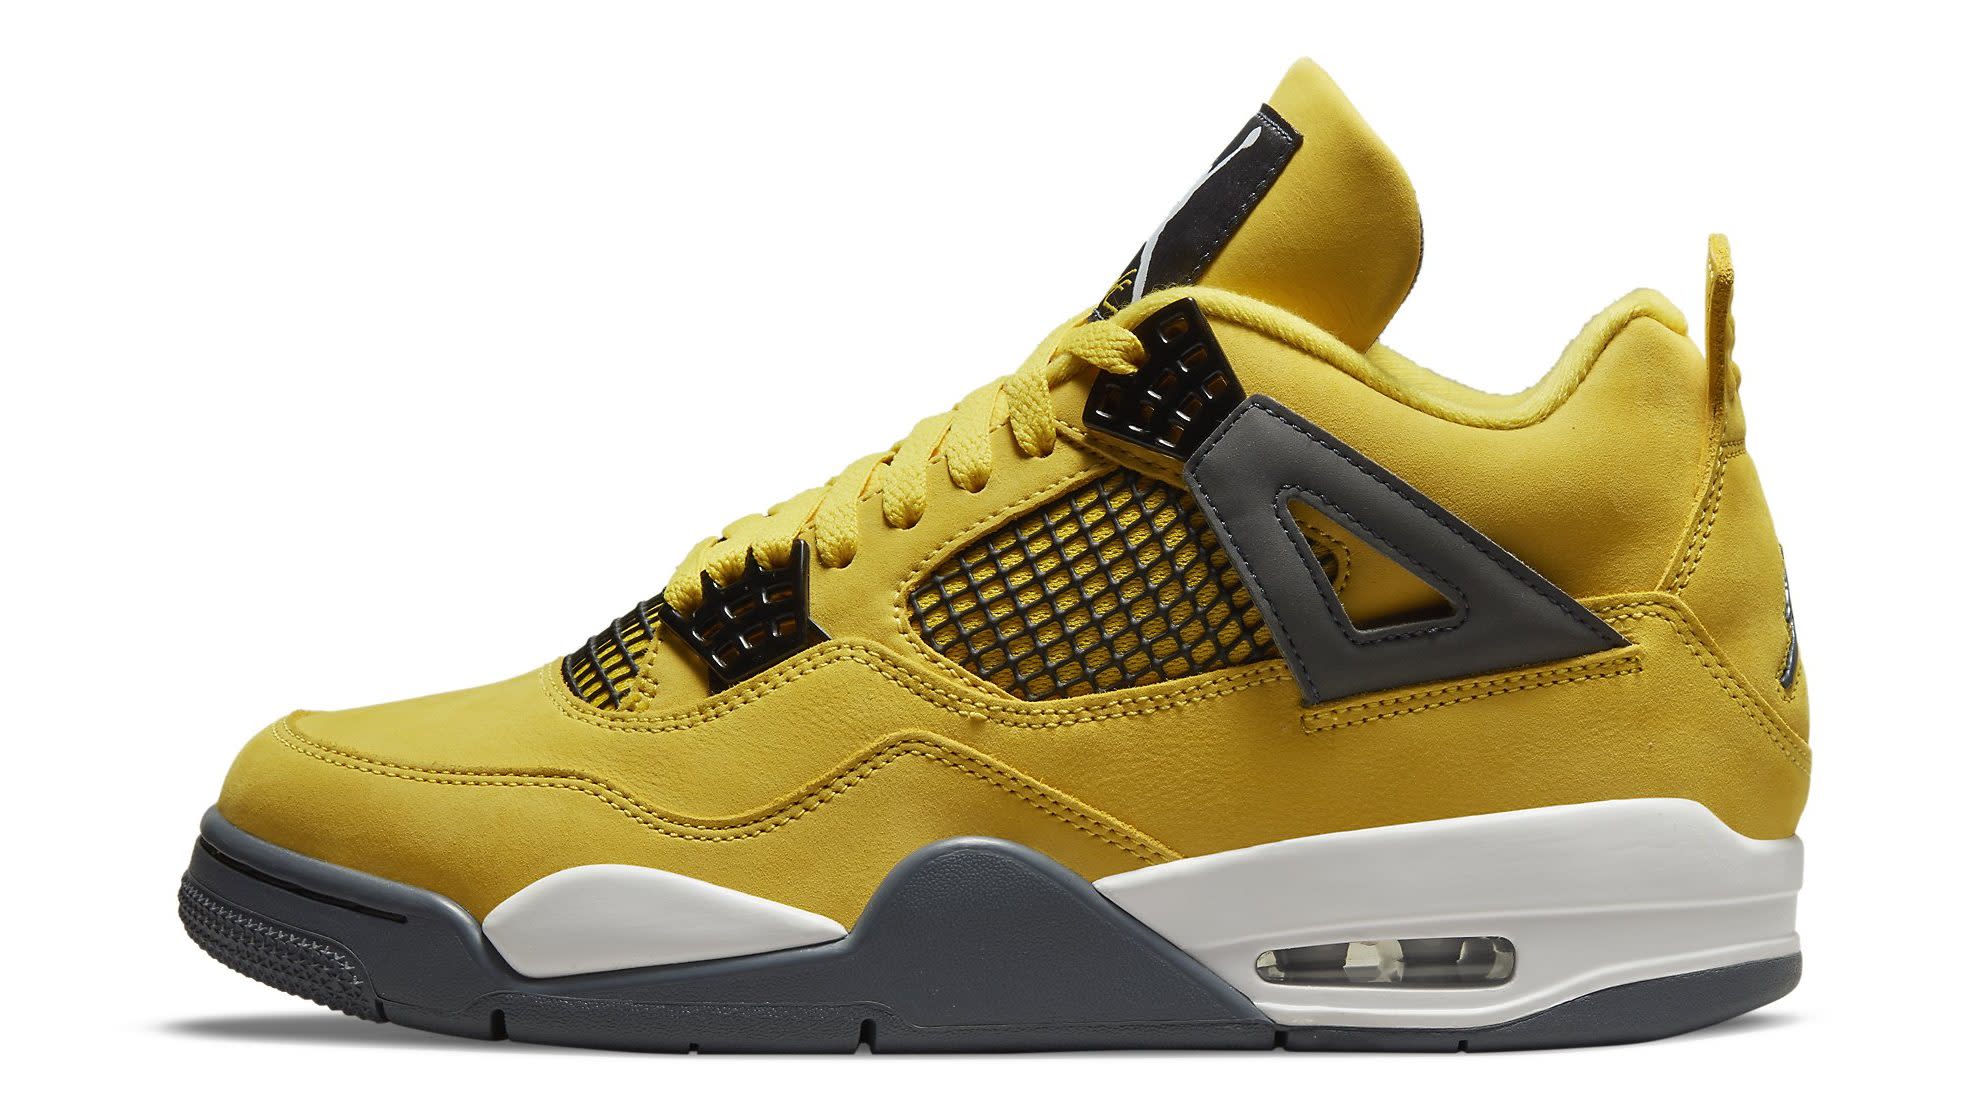 Images of This Year’s Air Jordan 4 ‘Lightning’ Release Surface